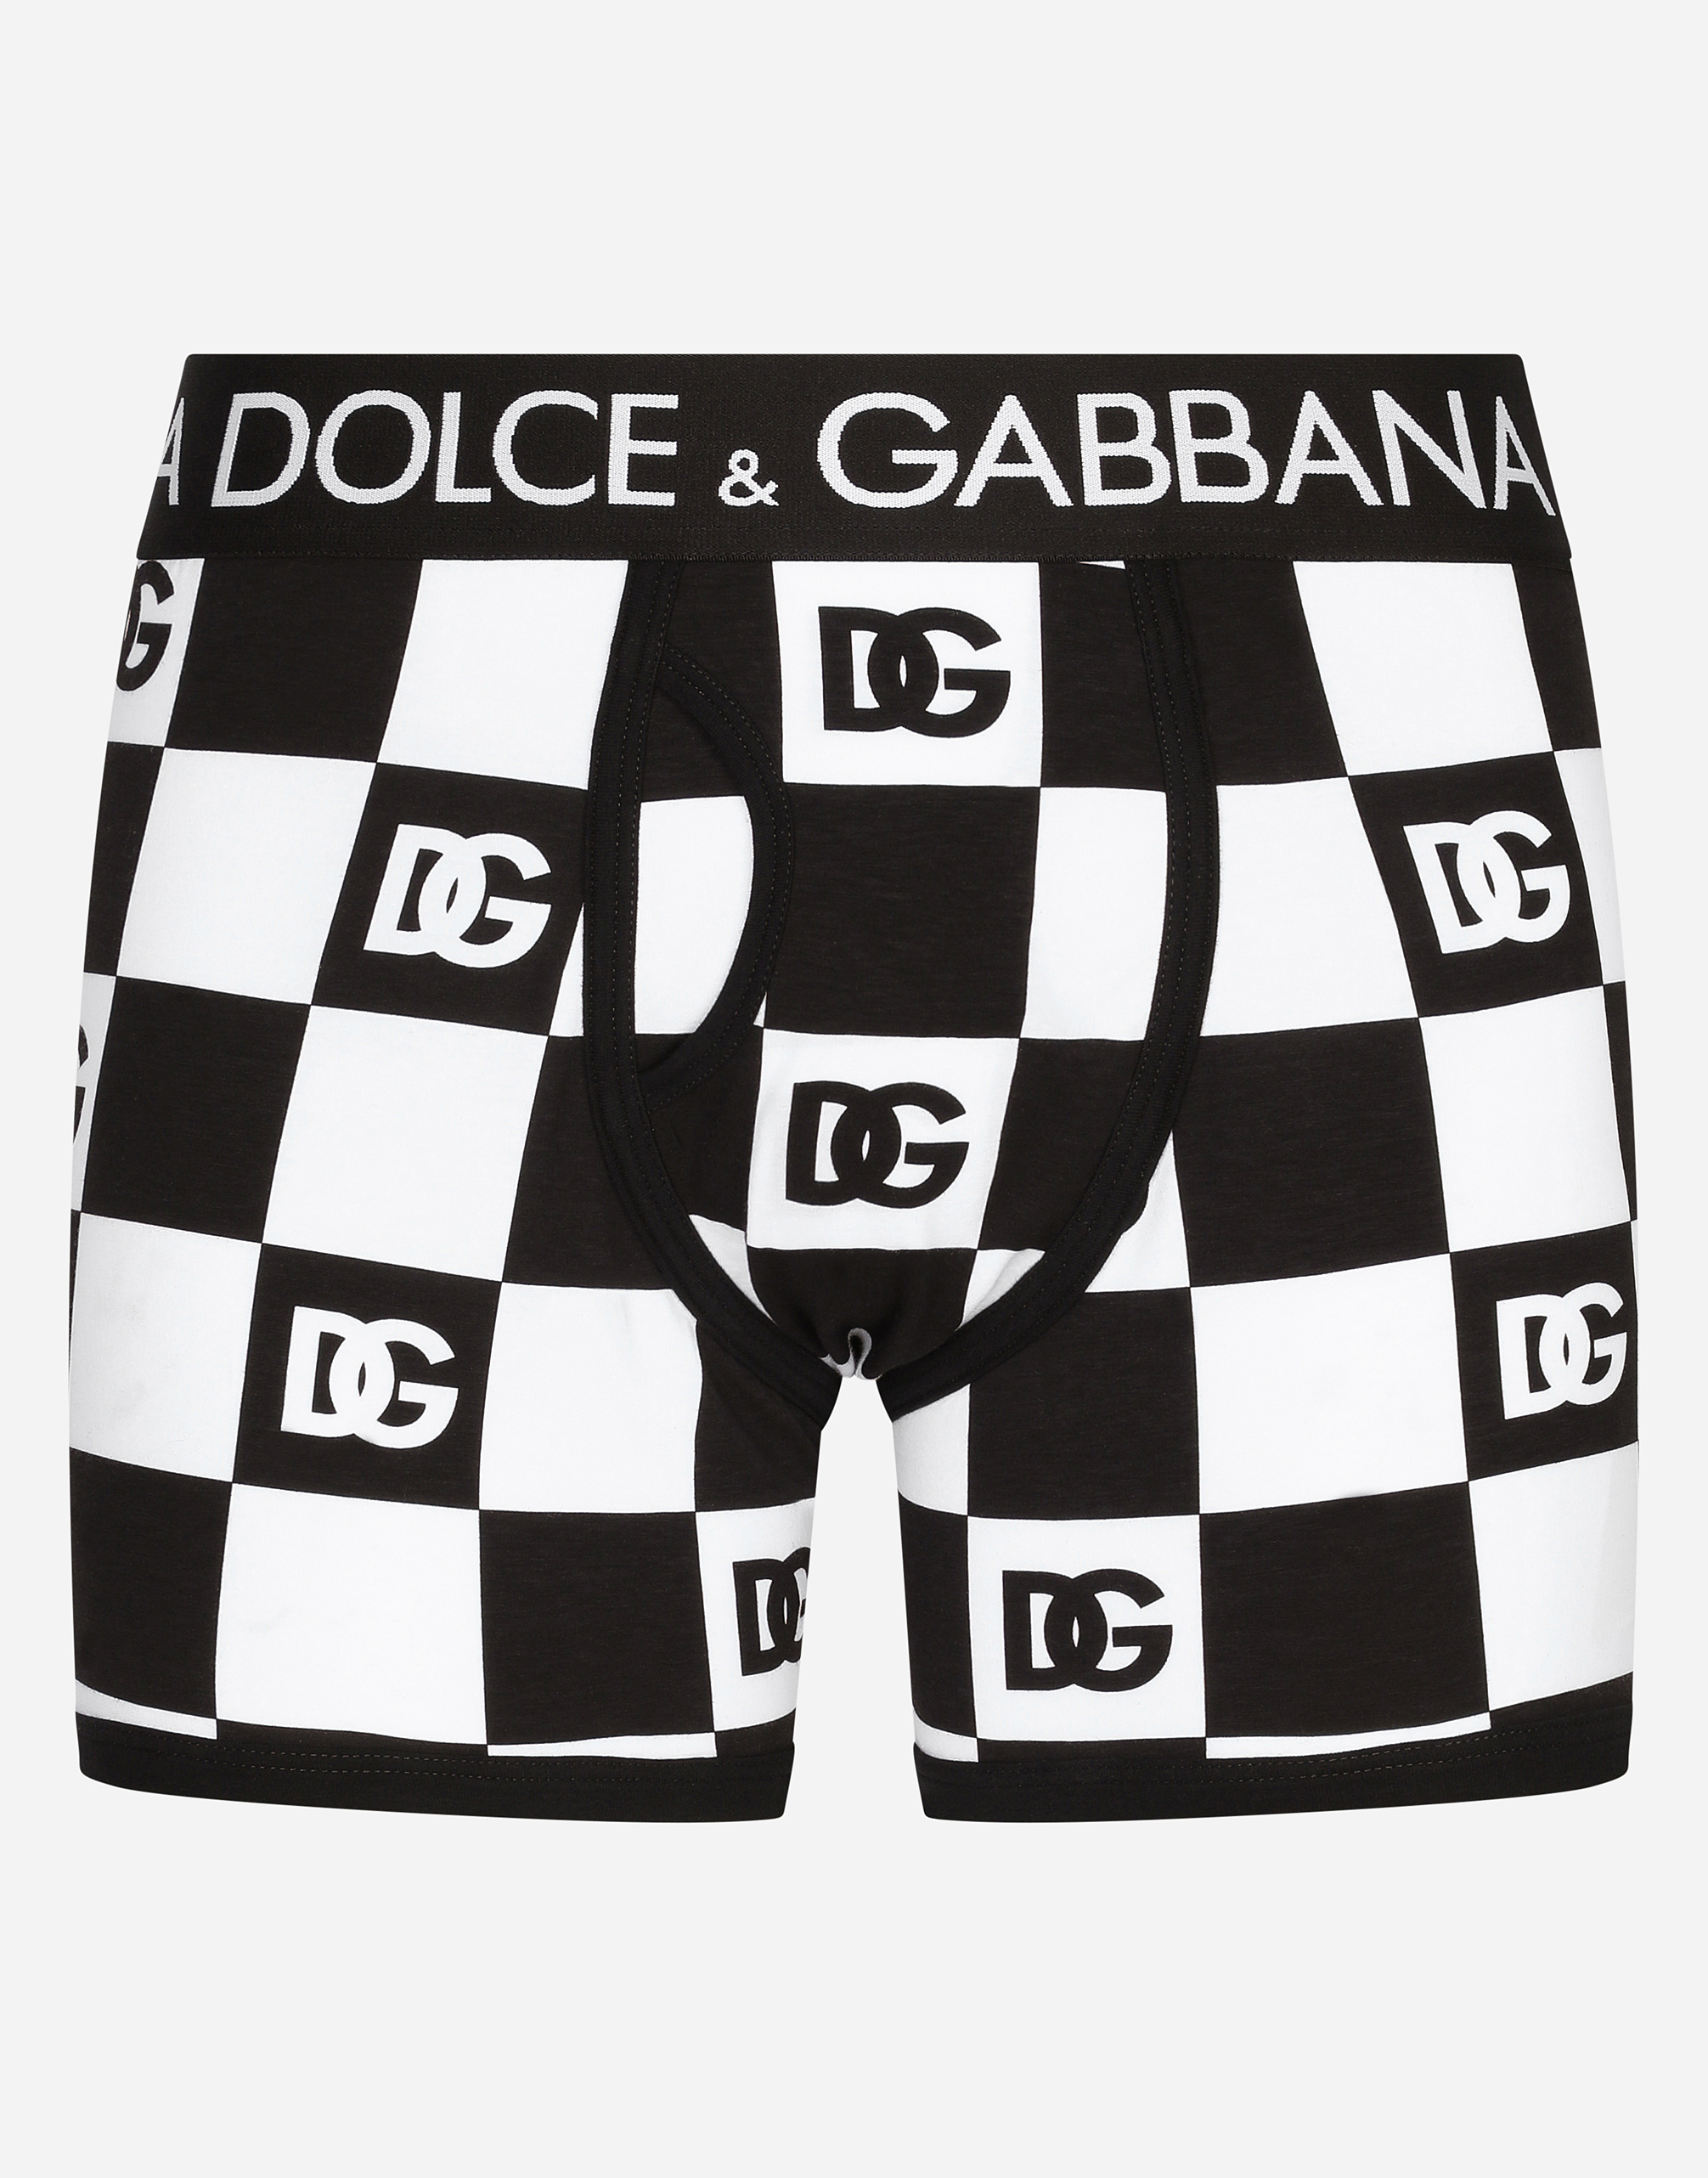 Damier-print long-leg jersey boxers with DG logo in Multicolor